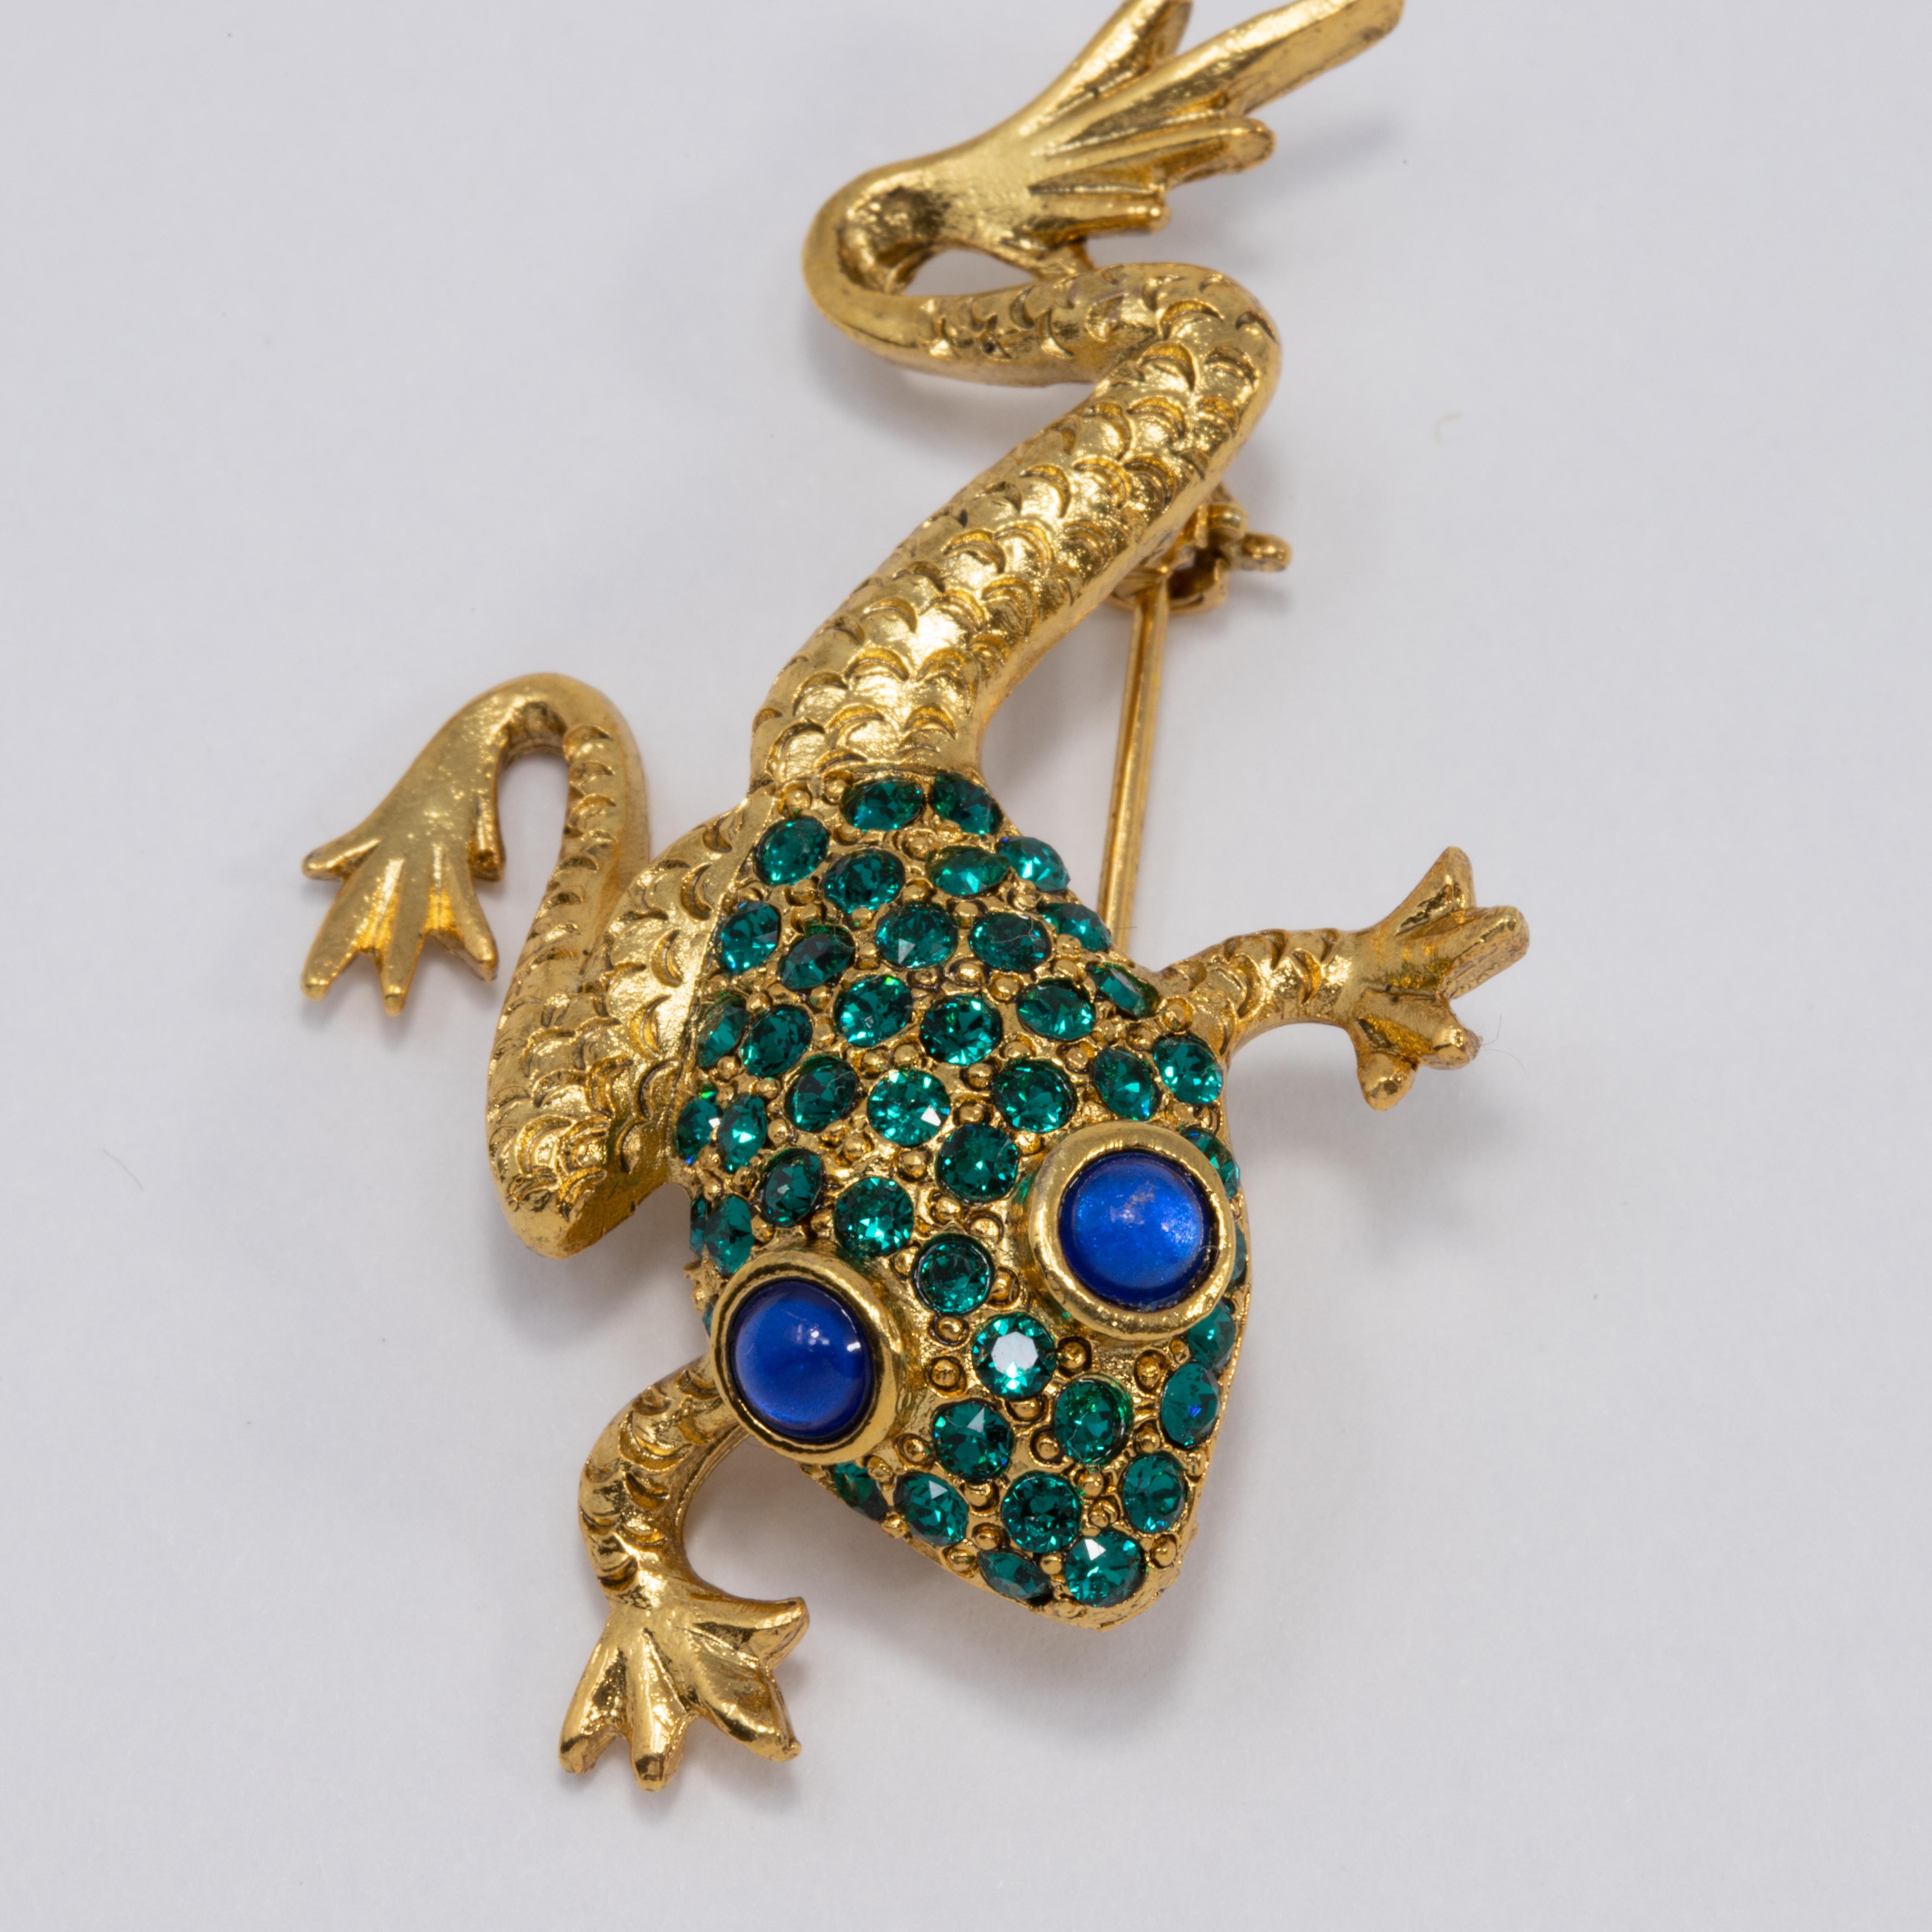 A quirky pin/brooch by Oscar de la Renta! This little gold-tone frog is decorated with pave green crystals and two mesmerising blue cabochon eyes.

Hallmarks: Oscar de la Renta, Made in USA